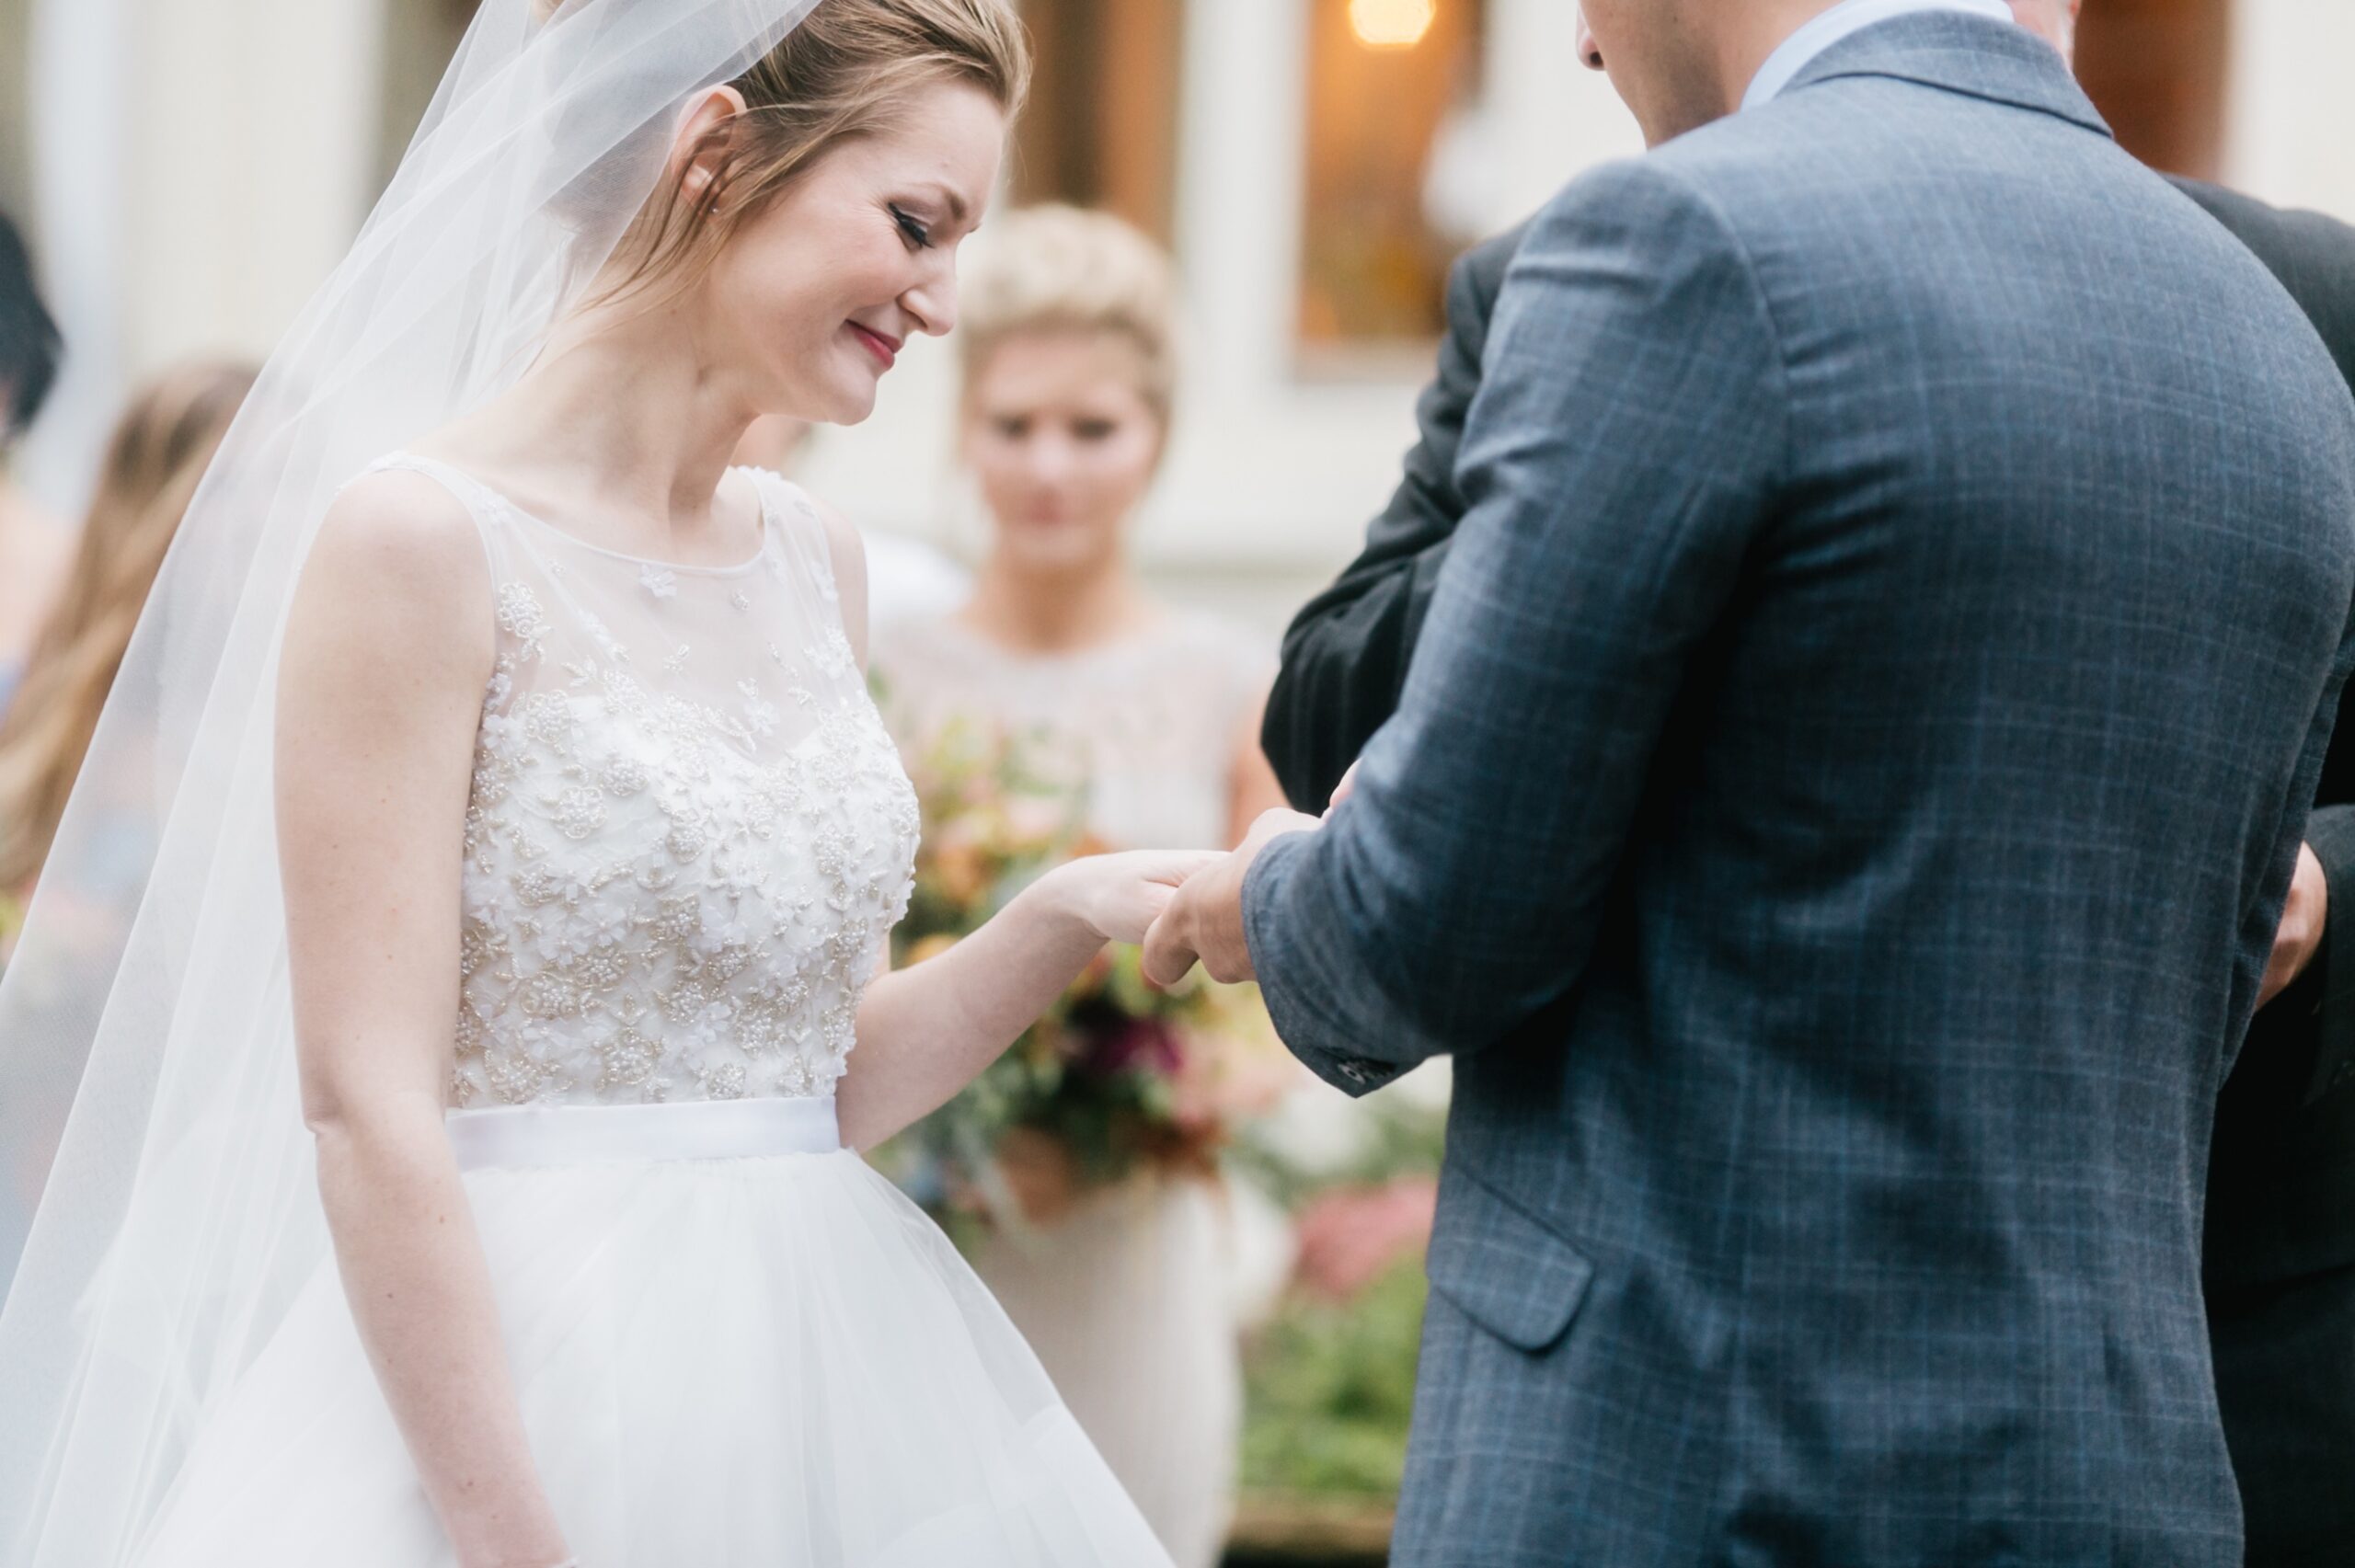 Bride and groom exchanging rings on an eclectic summer wedding day by Emily Wren Photography